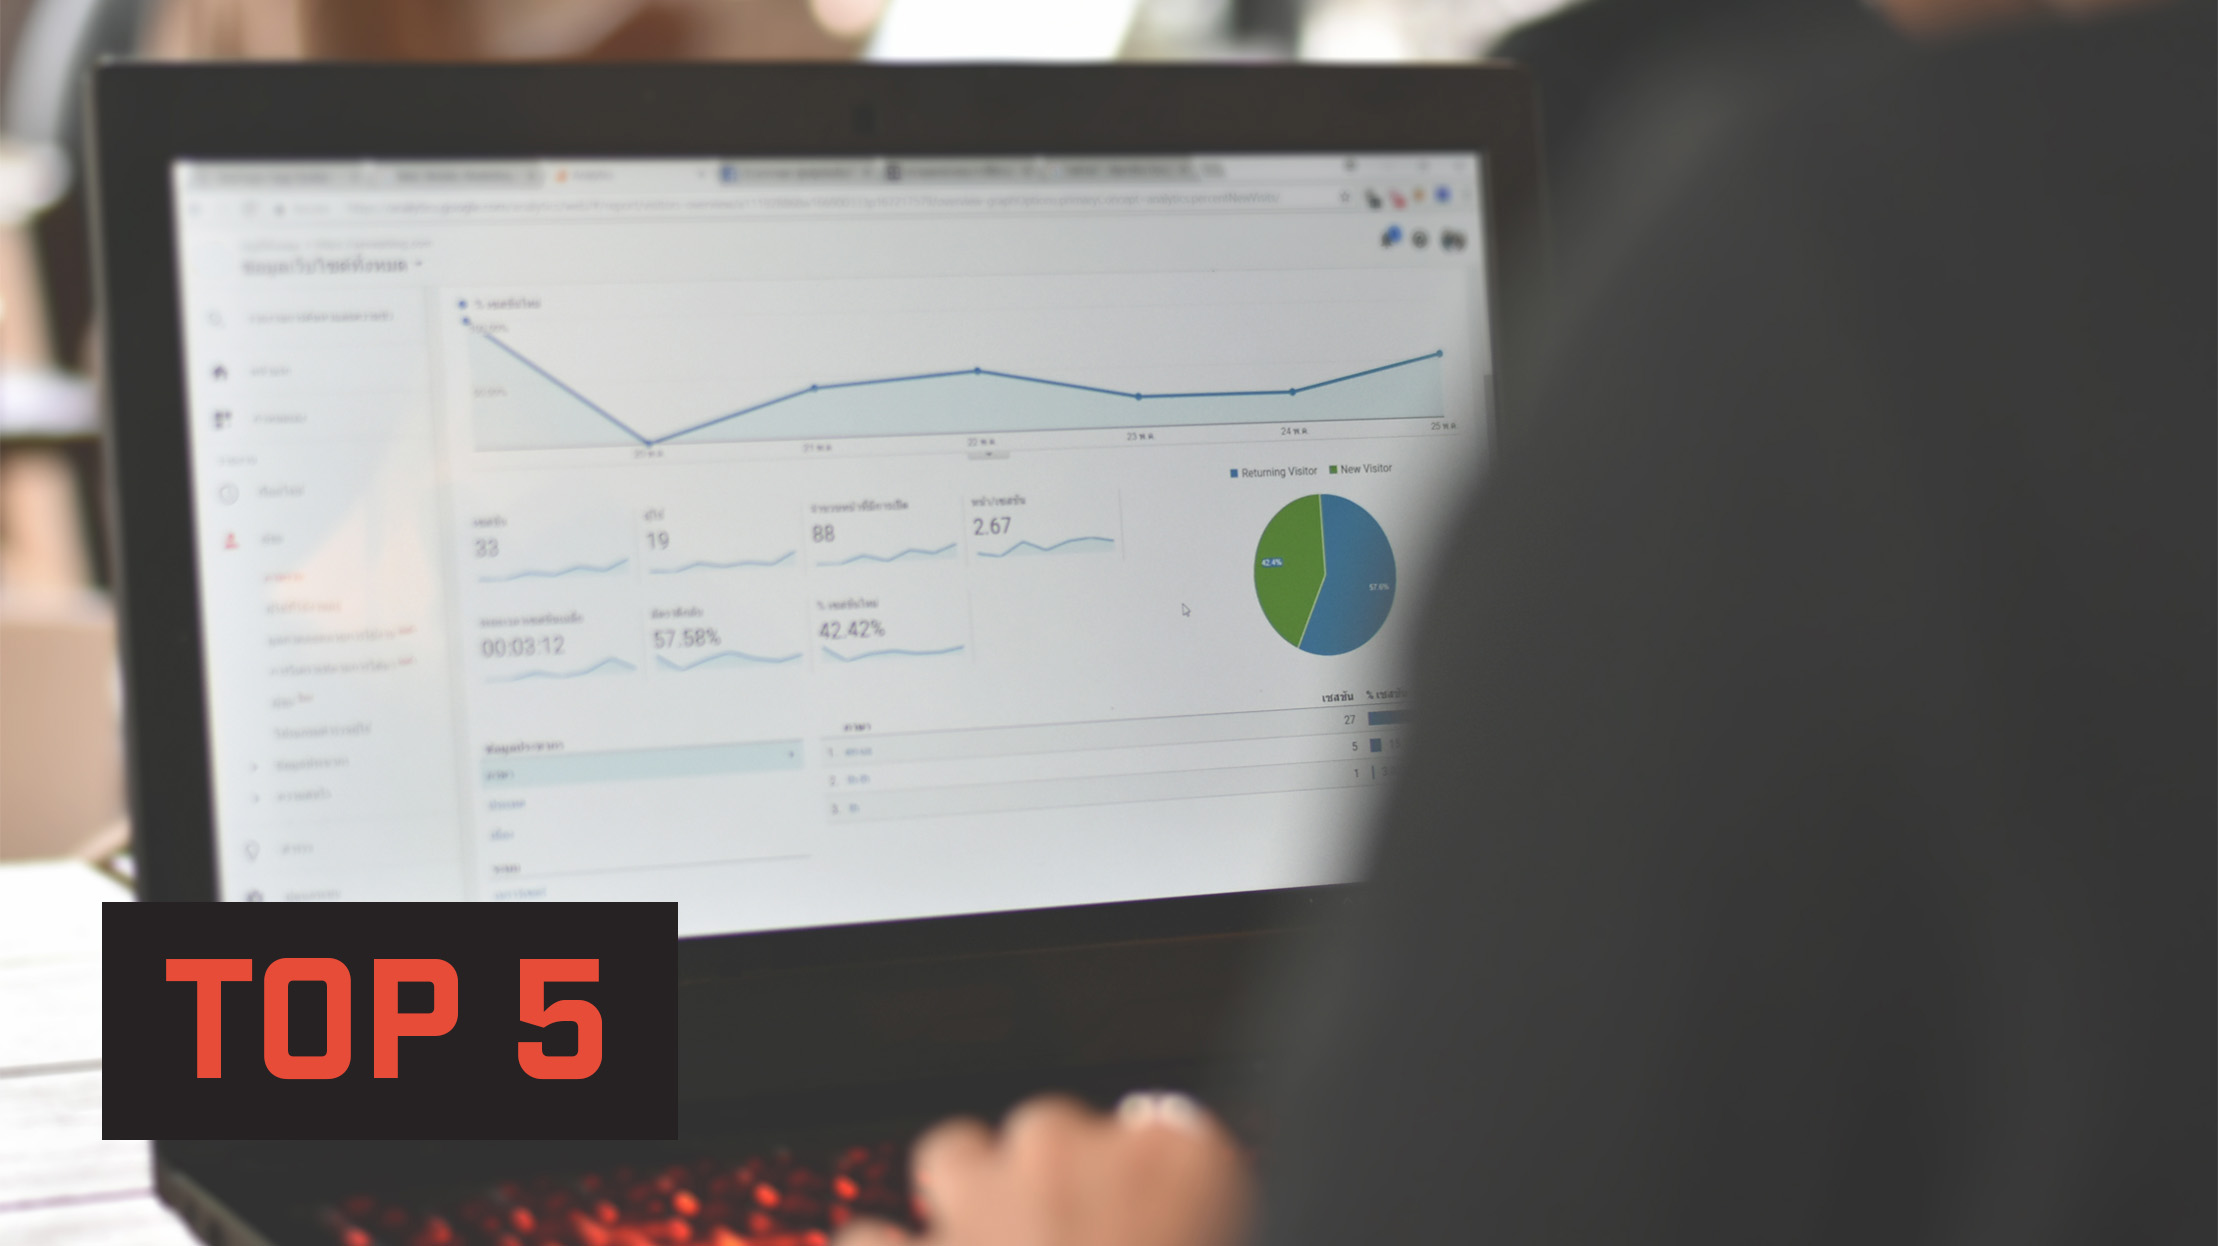 Top 5 website metrics to track to measure your social impact online